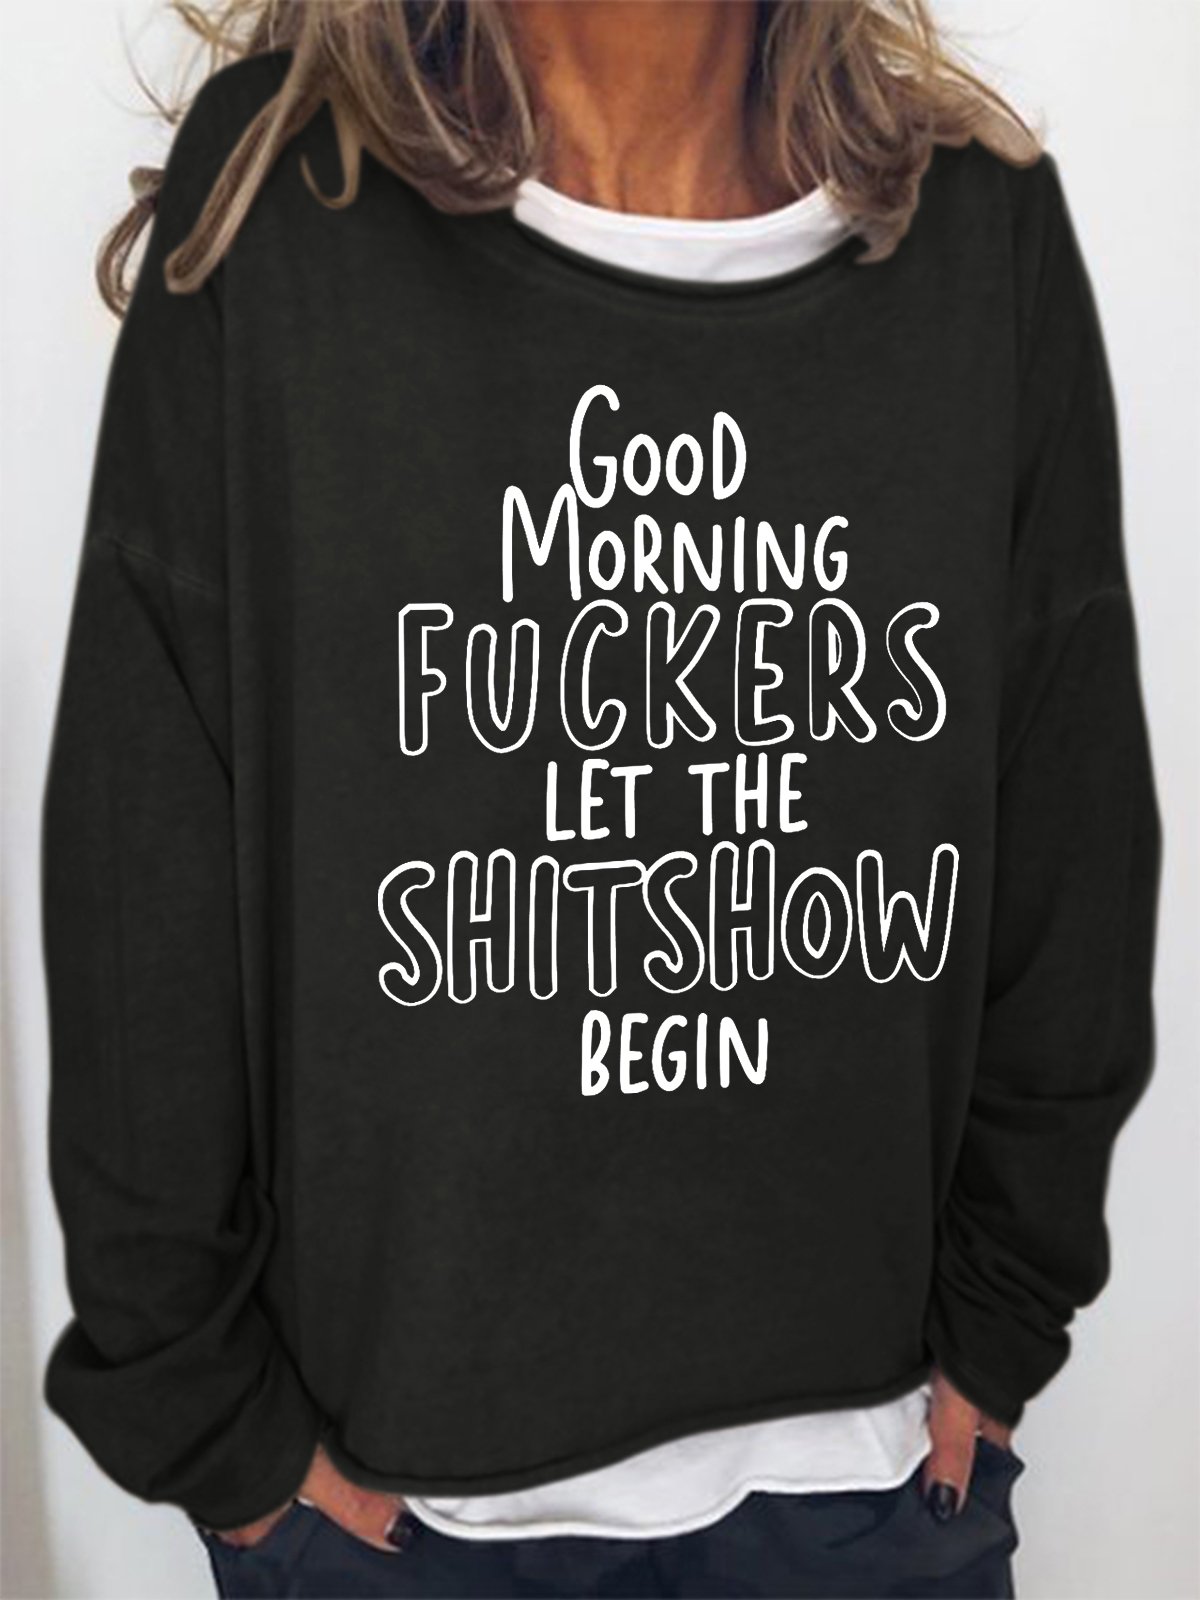 Women's Funny Word Good Morning Fuckers Let The Shitshow Begin Text Letters Crew Neck Sweatshirt